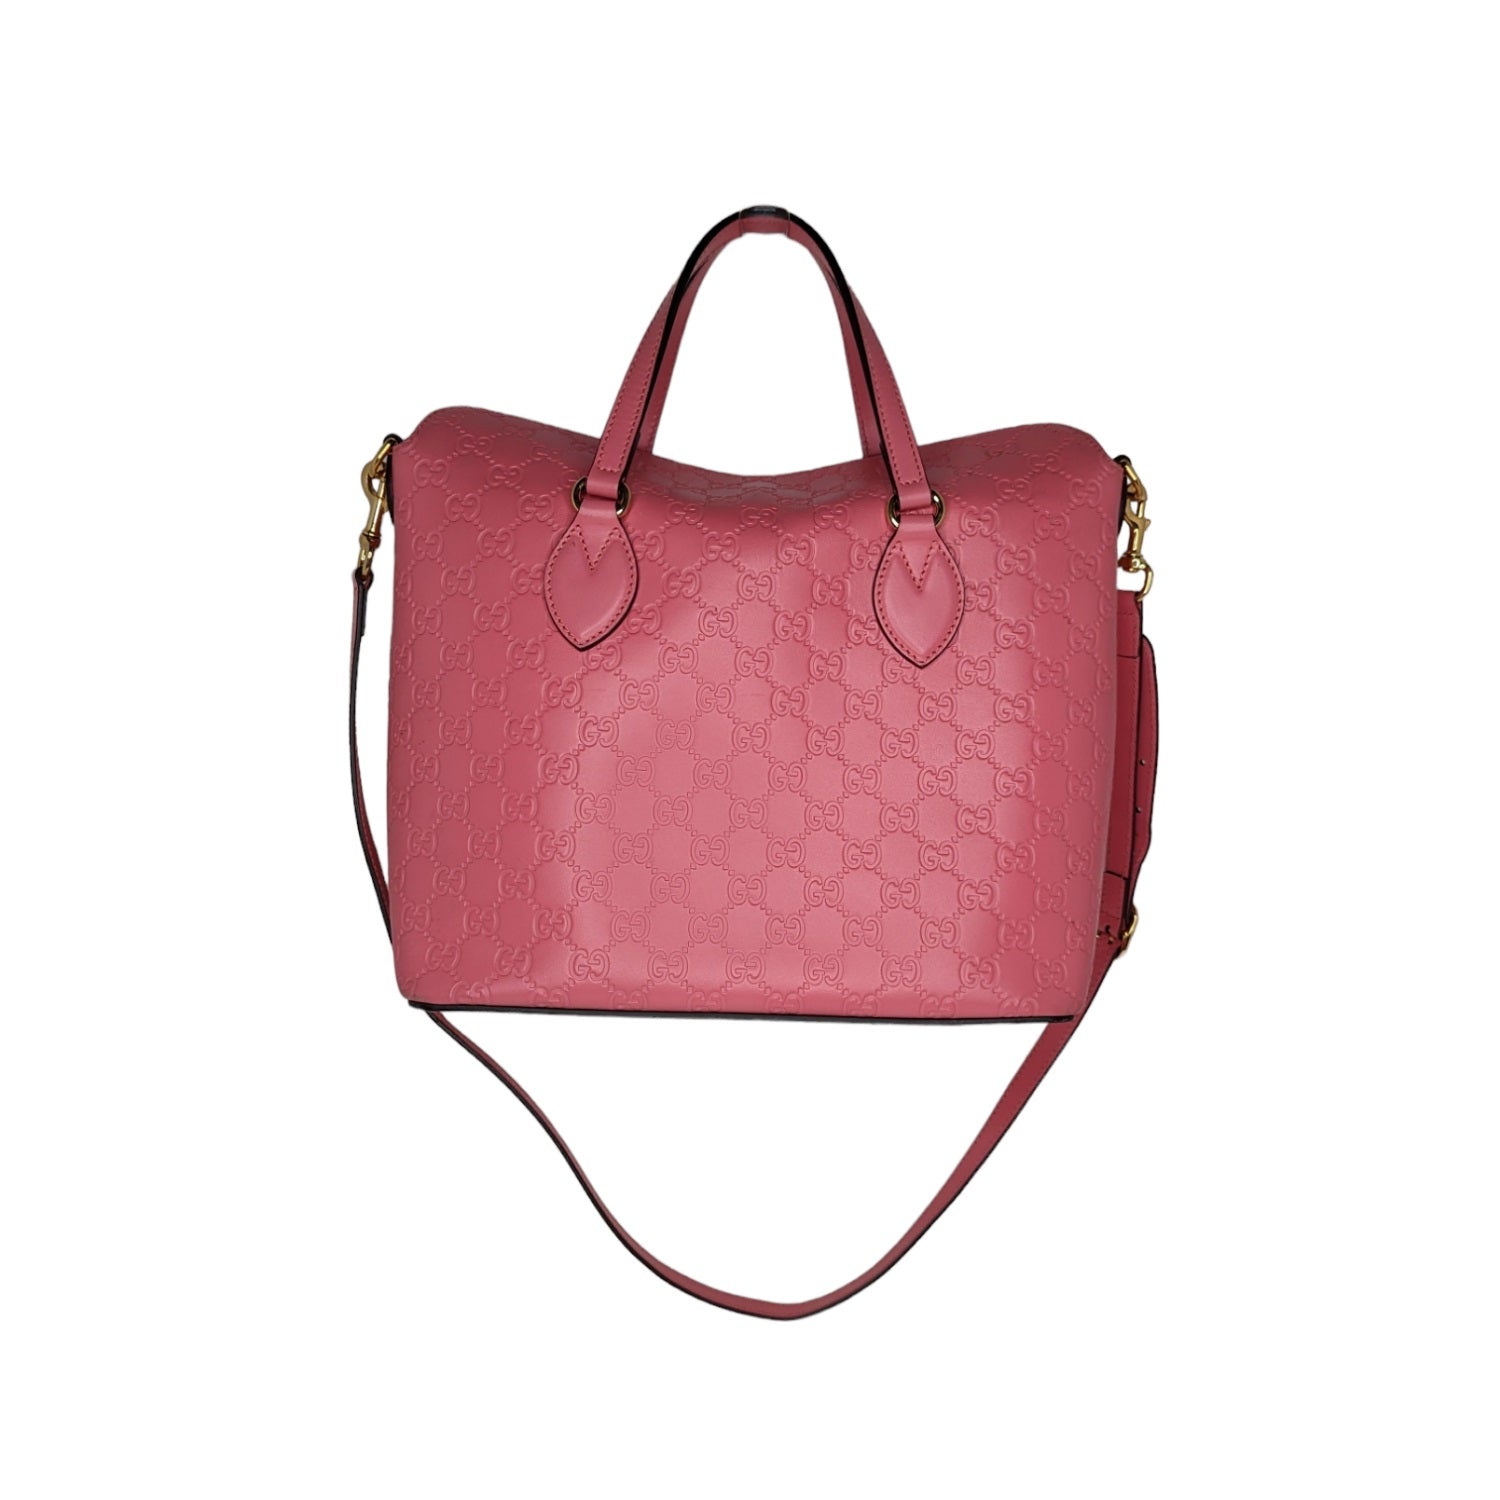 Gucci Pink Signature Guccissima Leather Top Handle Bag - TheRelux.com